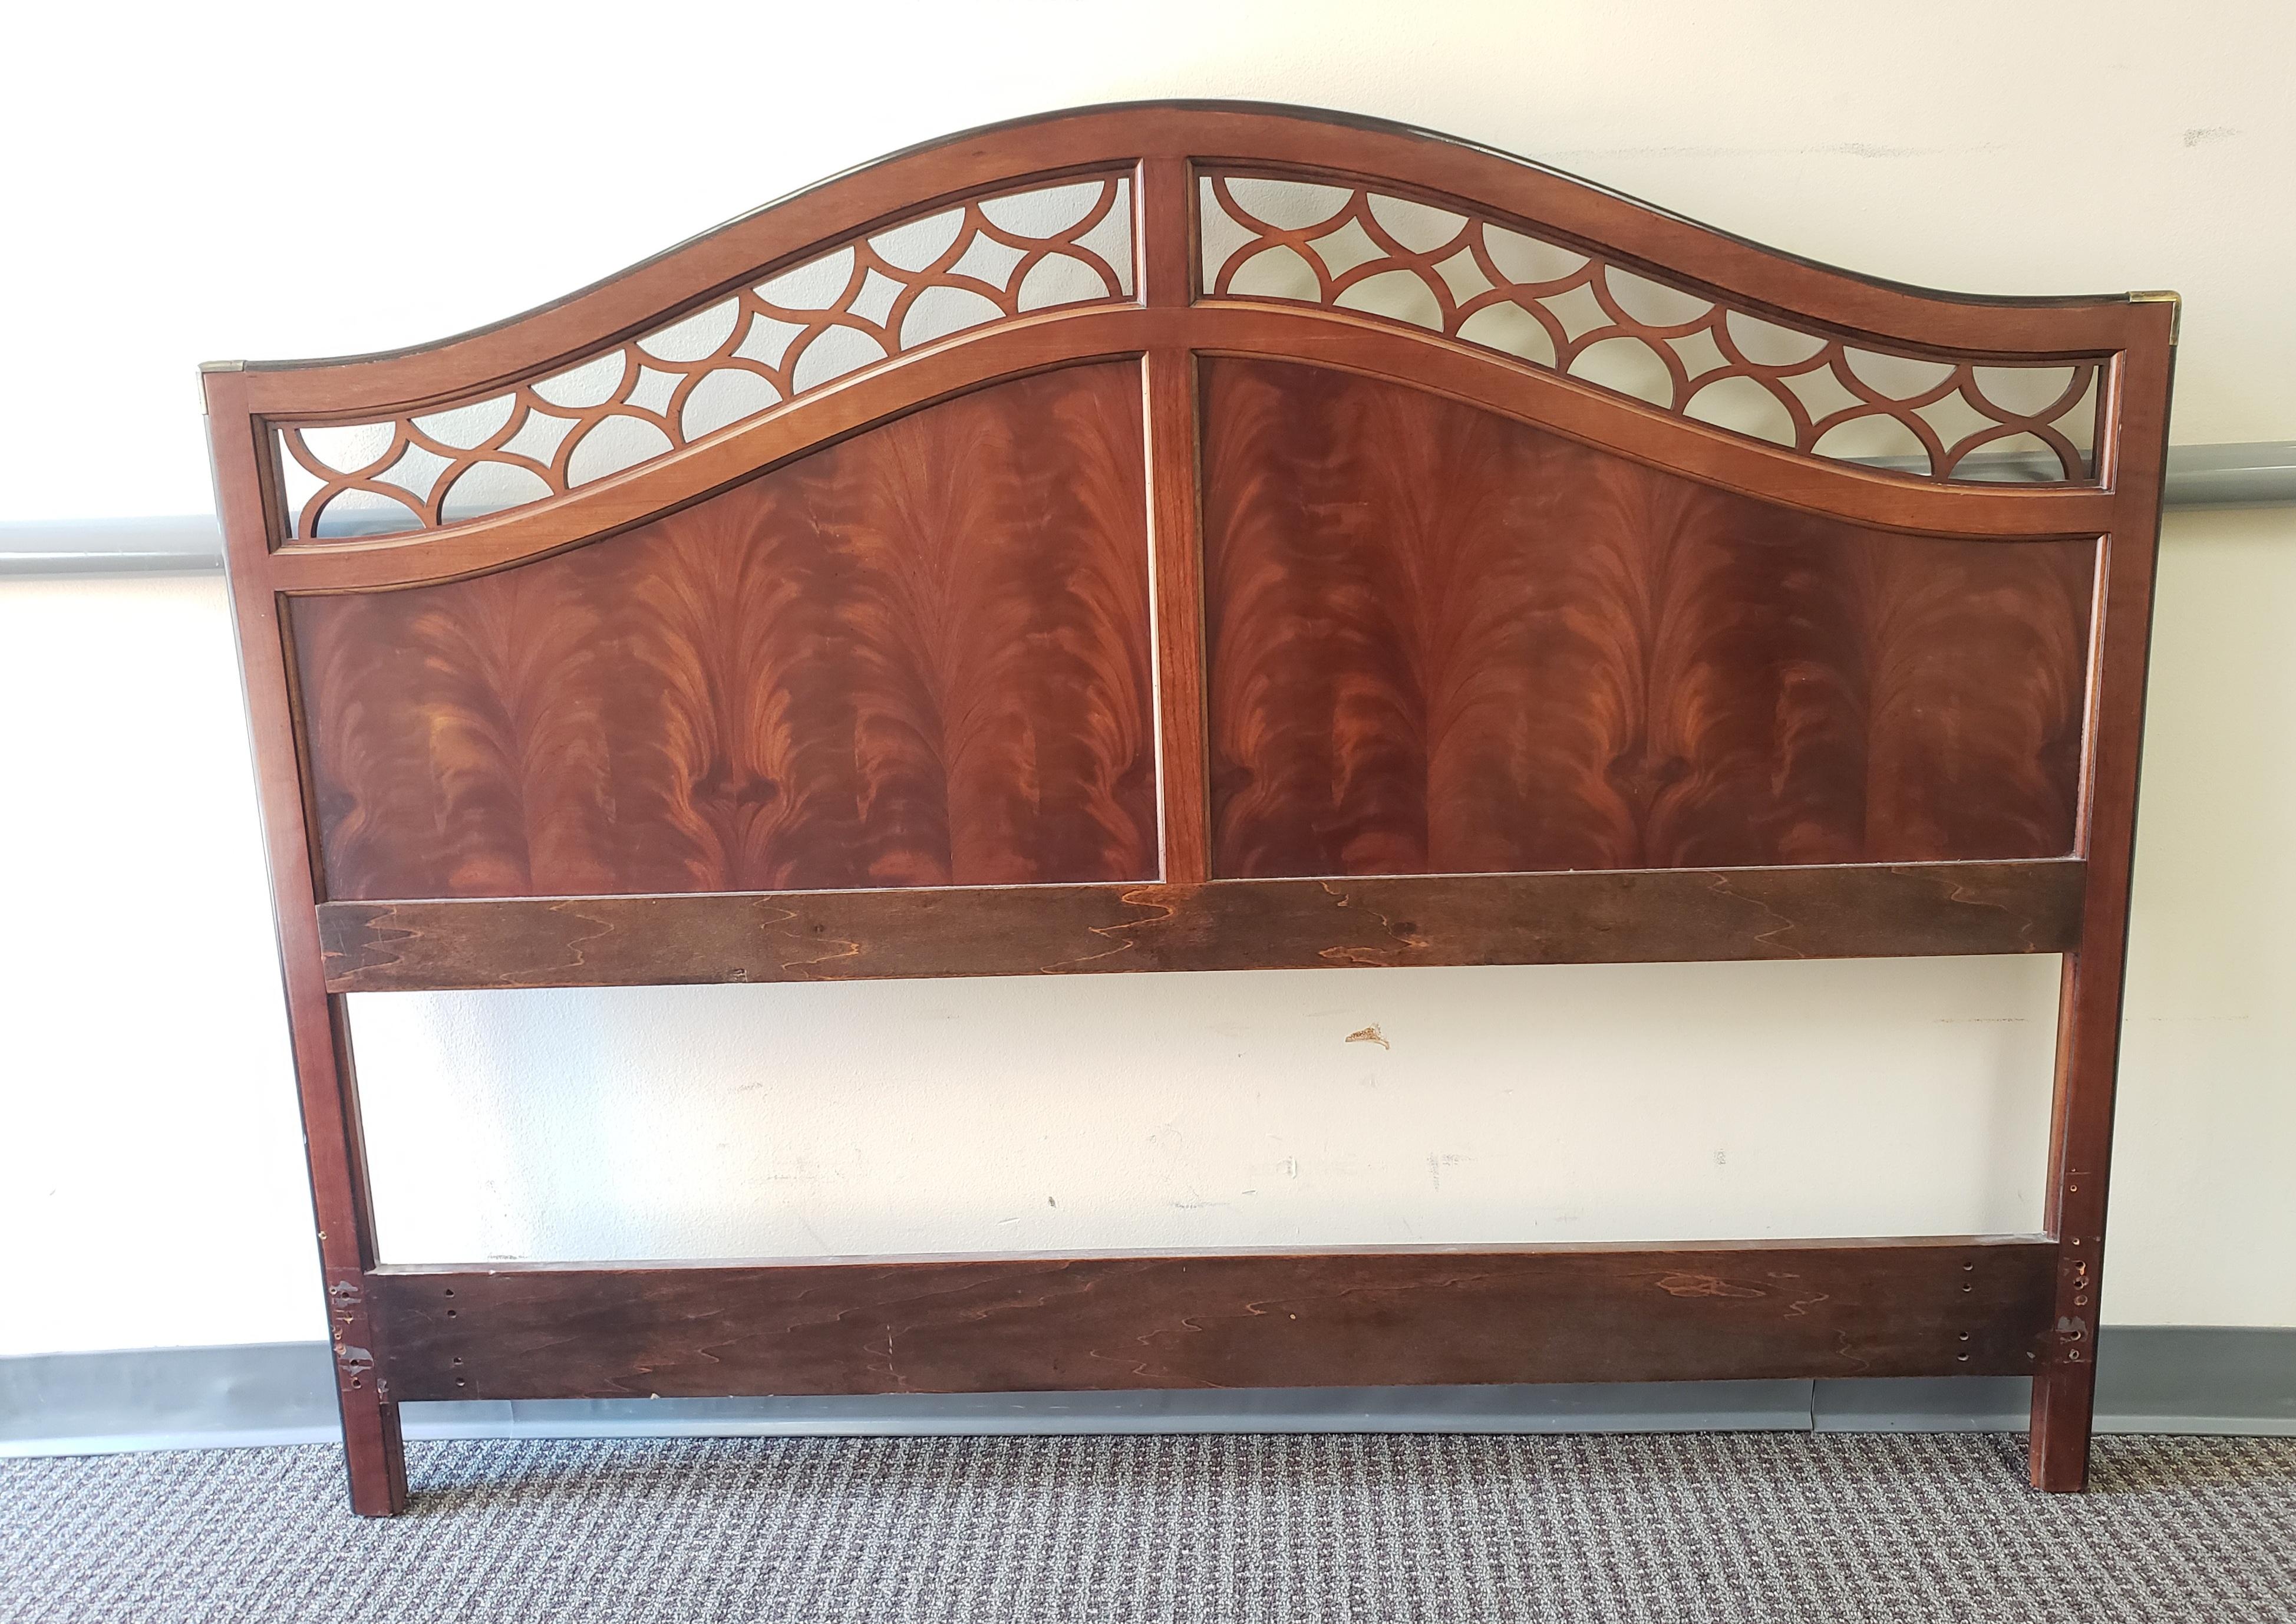 Varnished 1970s National Mtairy Furniture Flame Mahogany Full Size Headboard For Sale